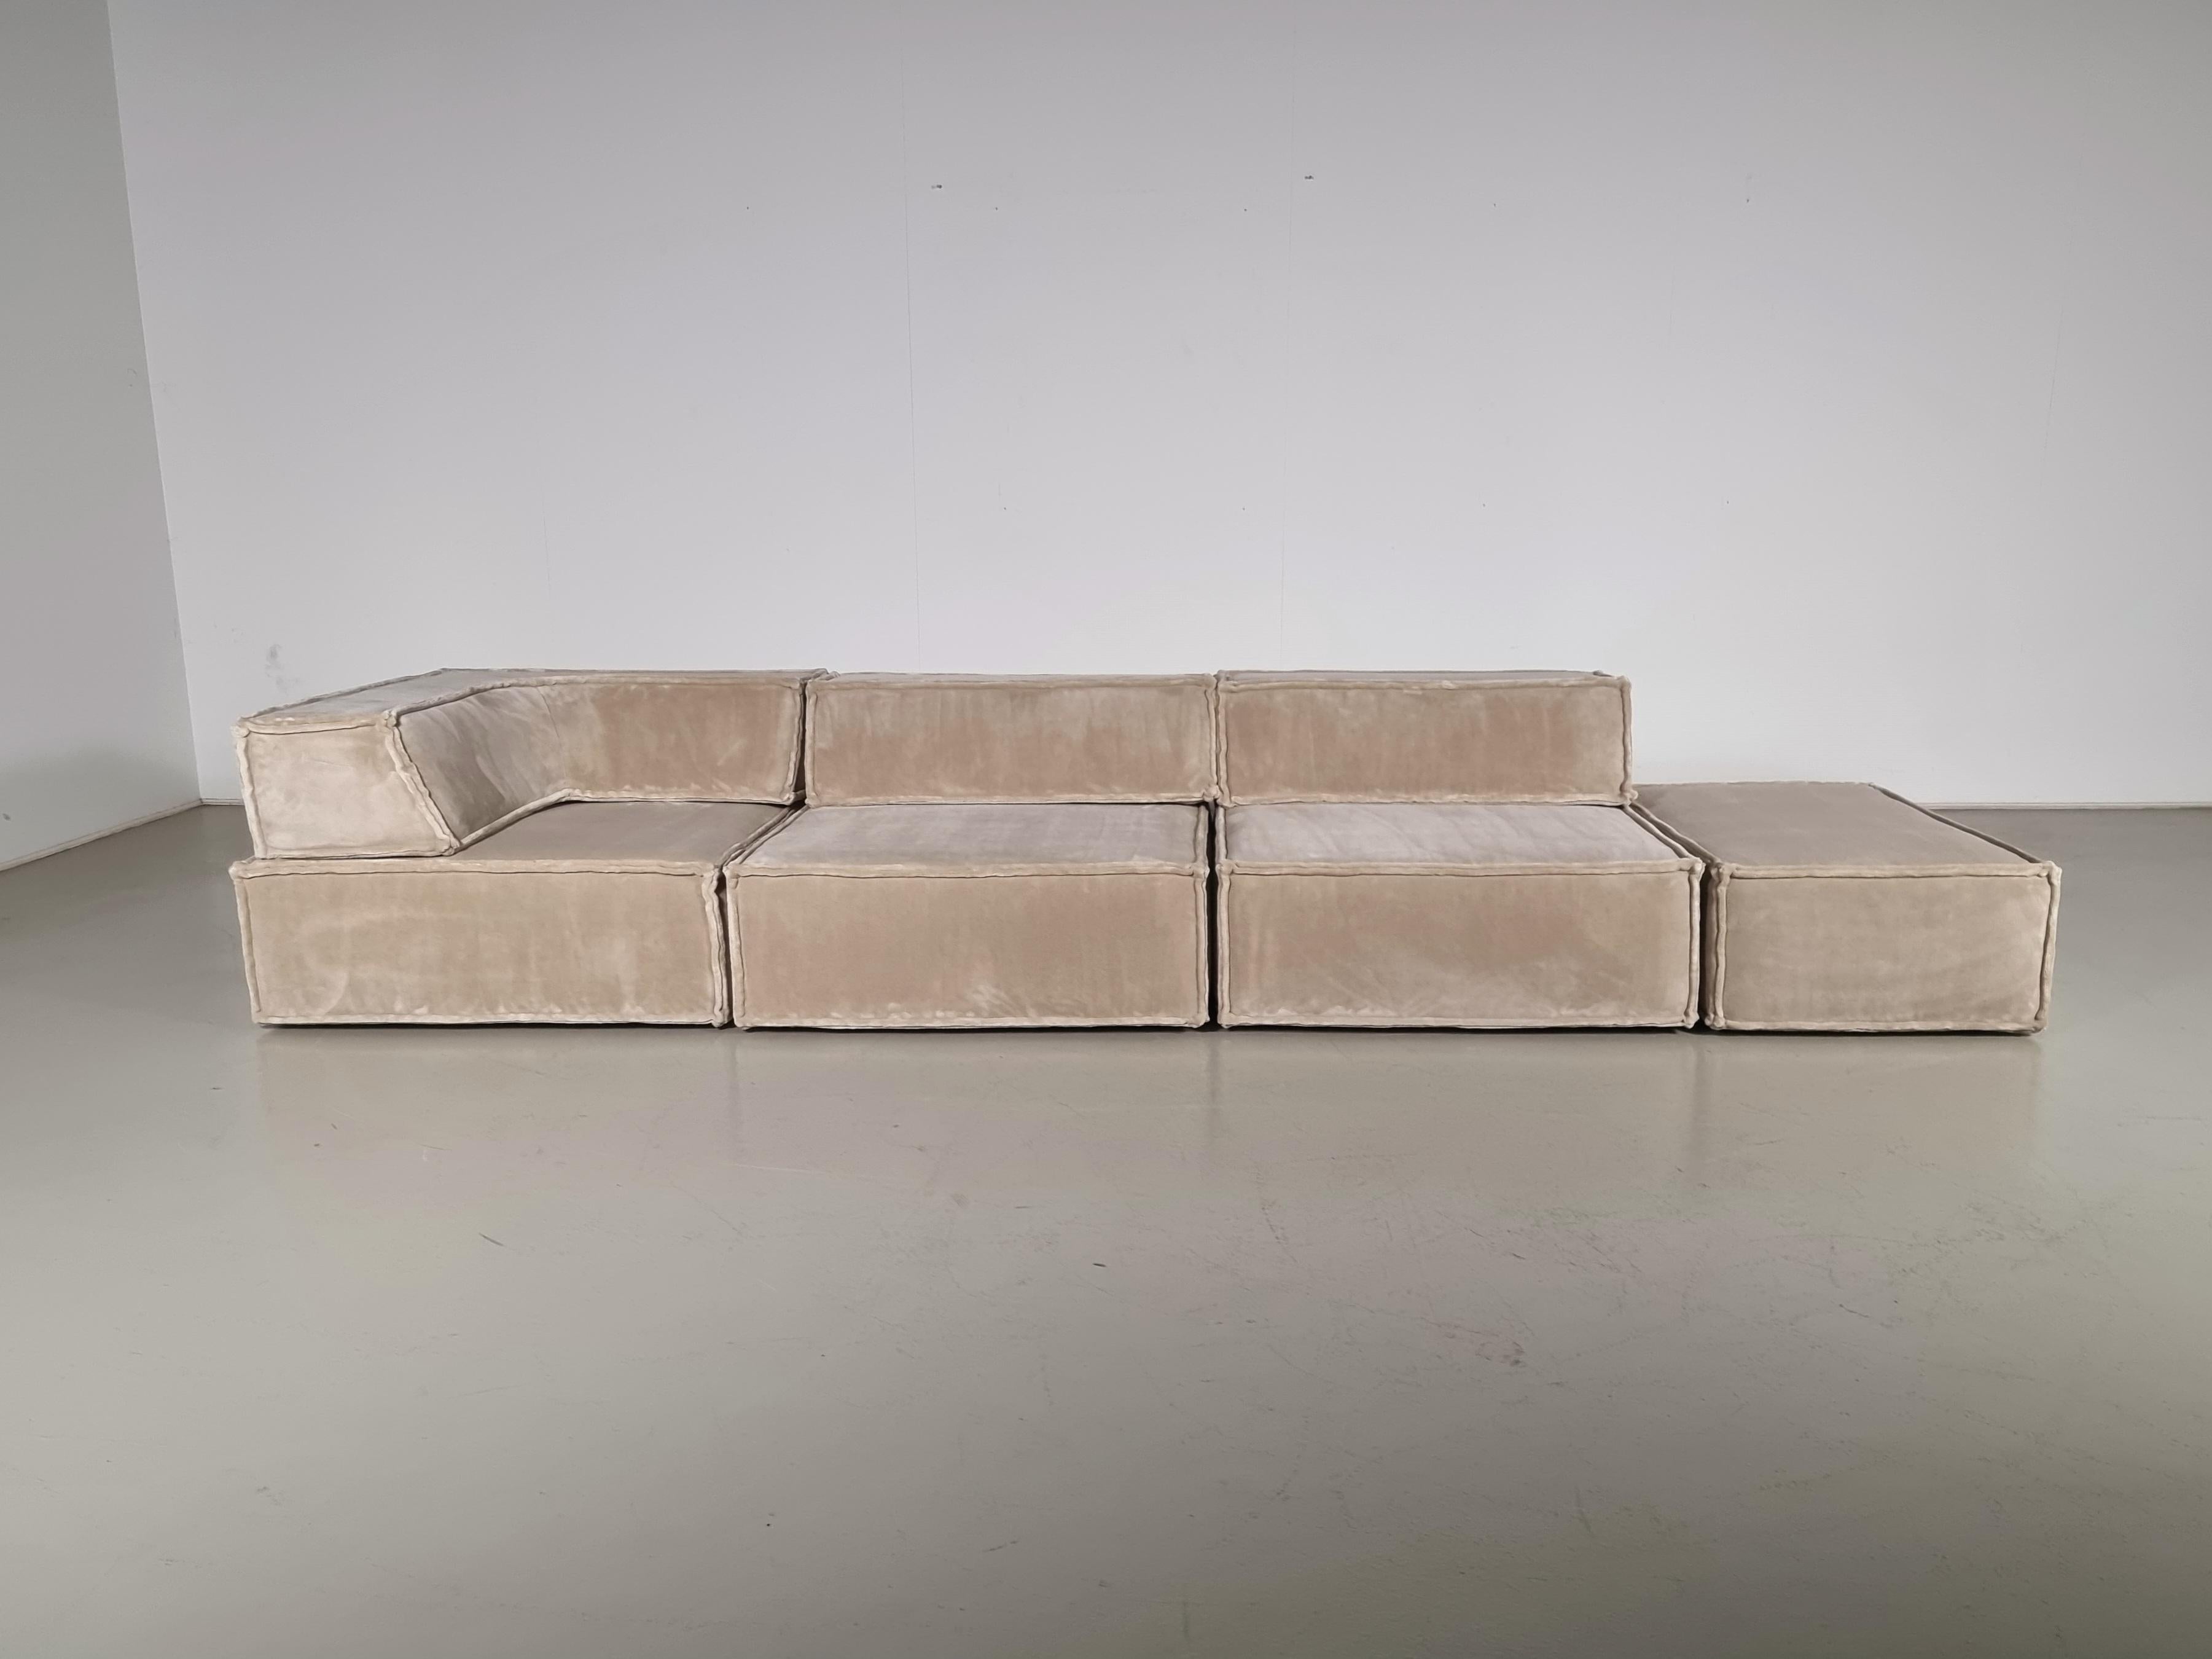 This comfortable new upholstered sectional sofa was designed by the Swiss Designers Group Team Form AG and produced in the 1970s by COR, Germany.  All sections of the sofa can be arranged at your will. Even the backrests can be positioned freely.